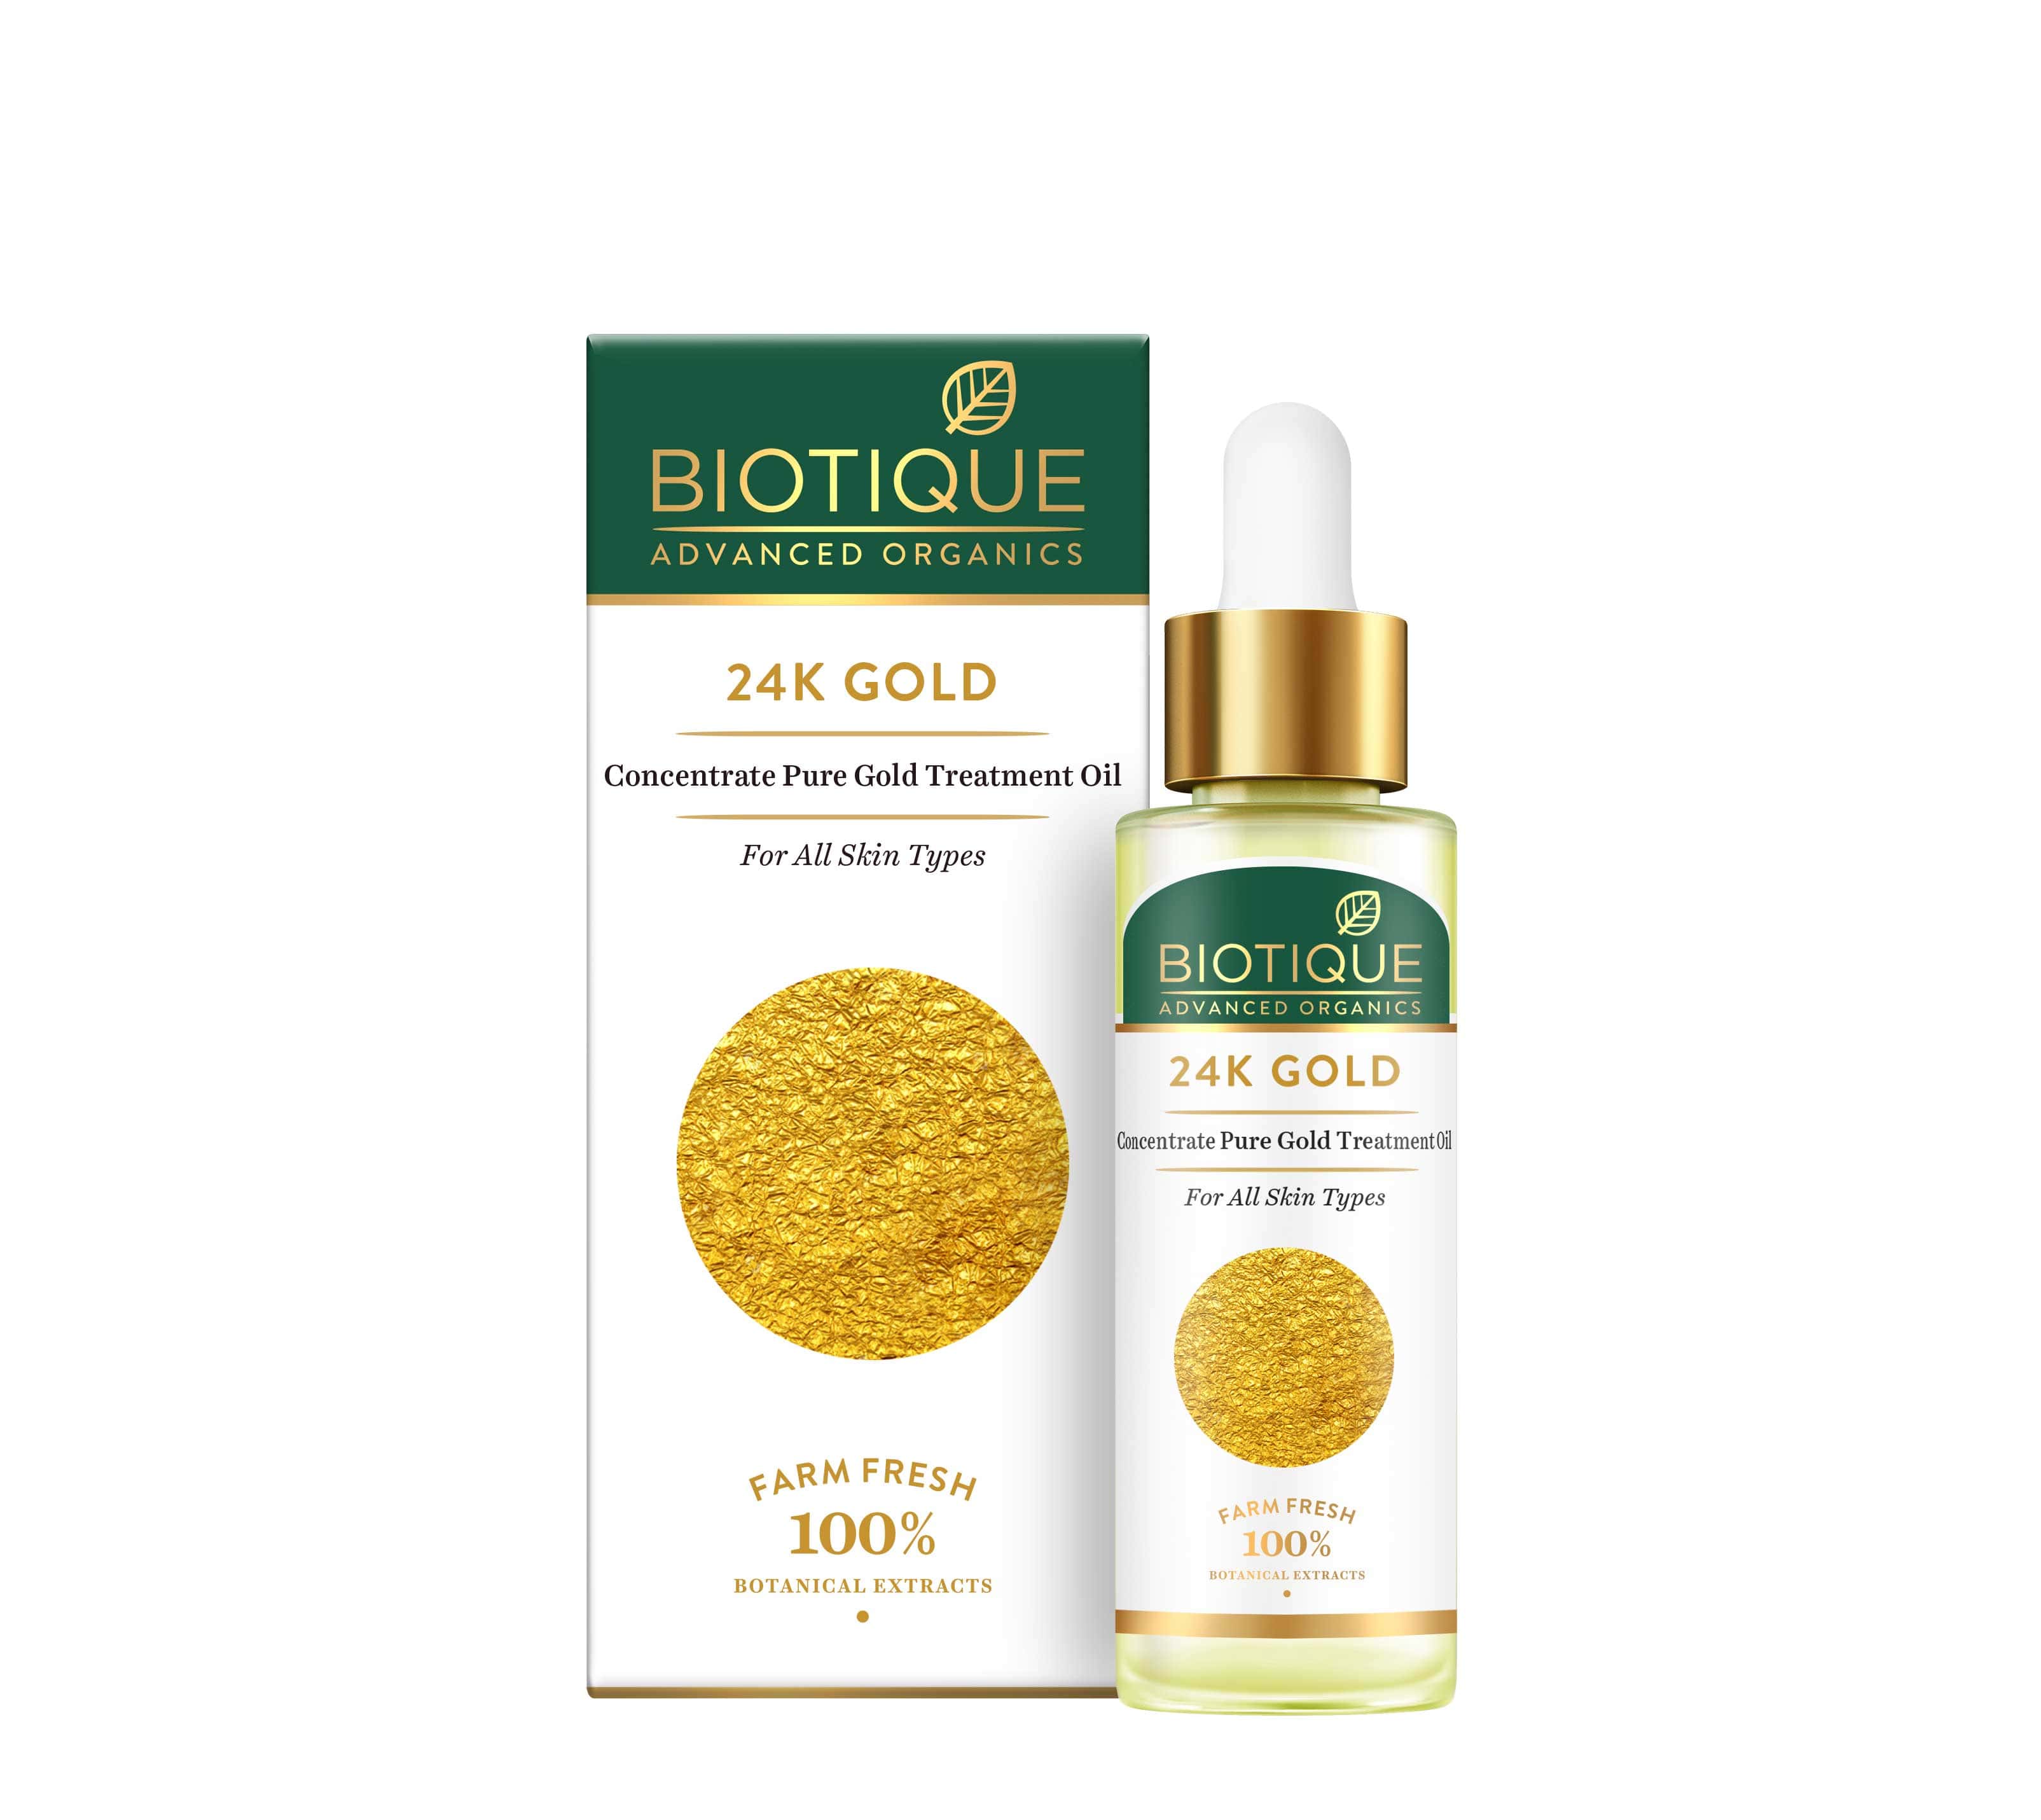 24K GOLD TREATMENT OIL Concentrate Pure Gold